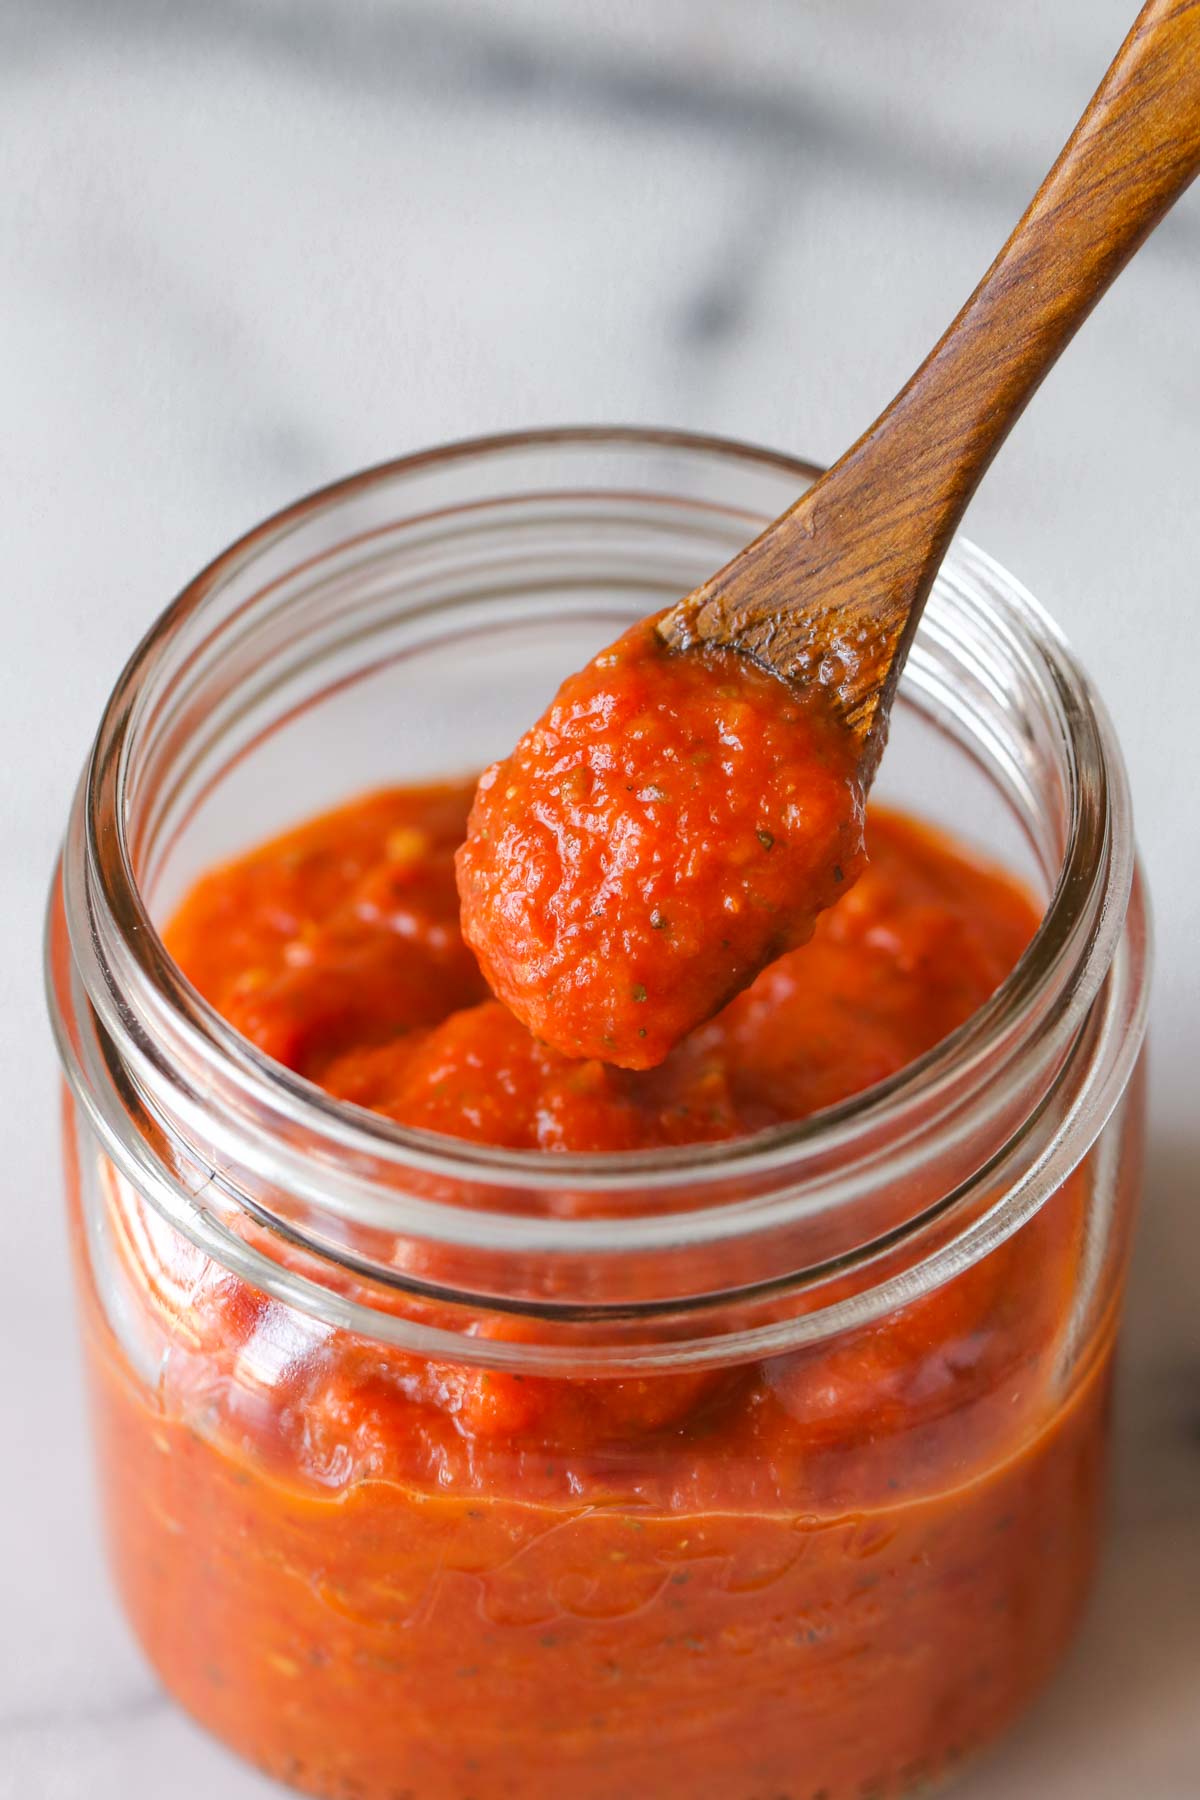 tomato sauce for pizza